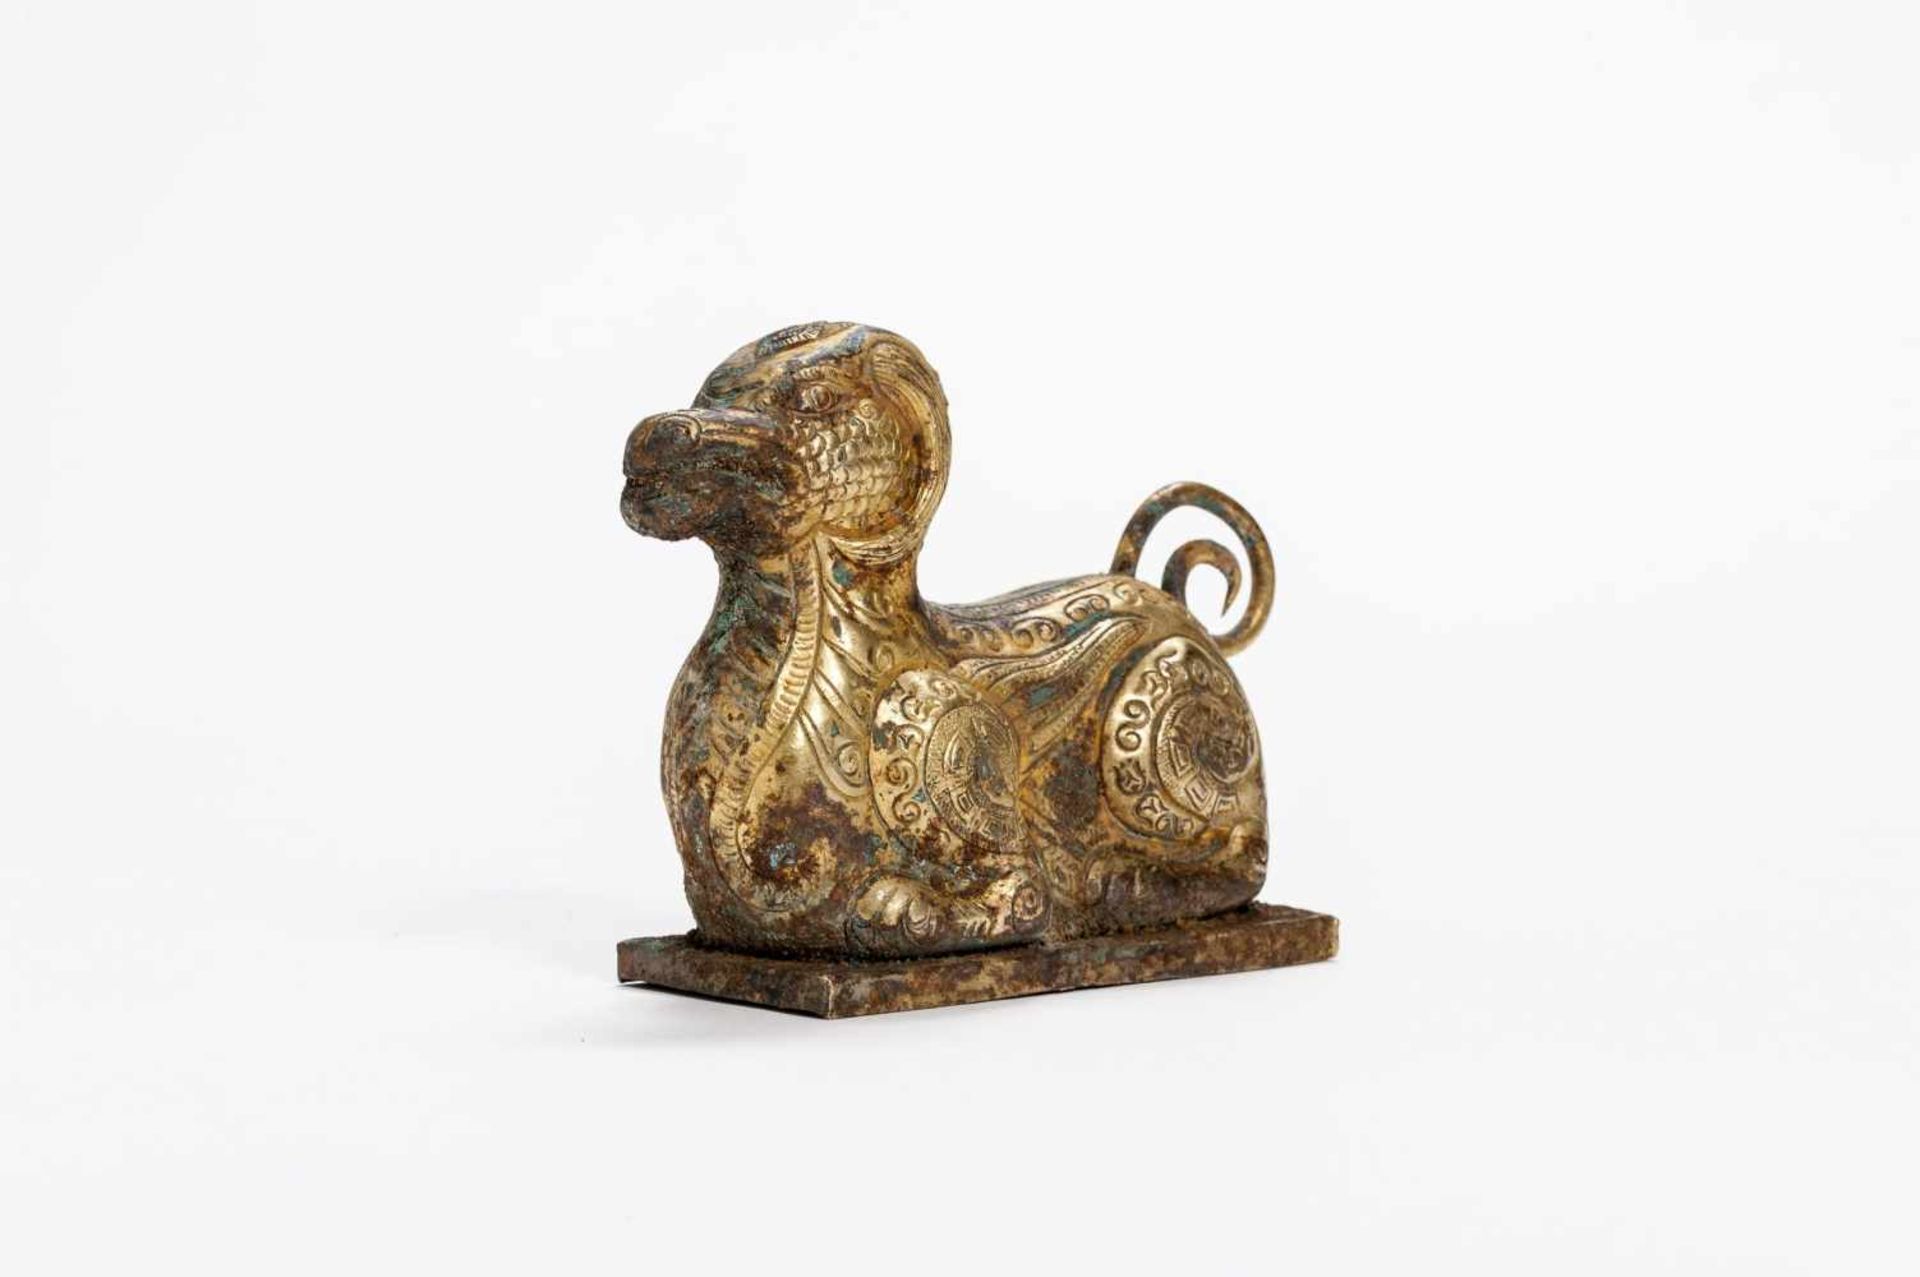 MYTHICAL ANIMAL Copper repoussé with fire gilding. China, presumably Qing-dynasty In archaic - Image 3 of 6